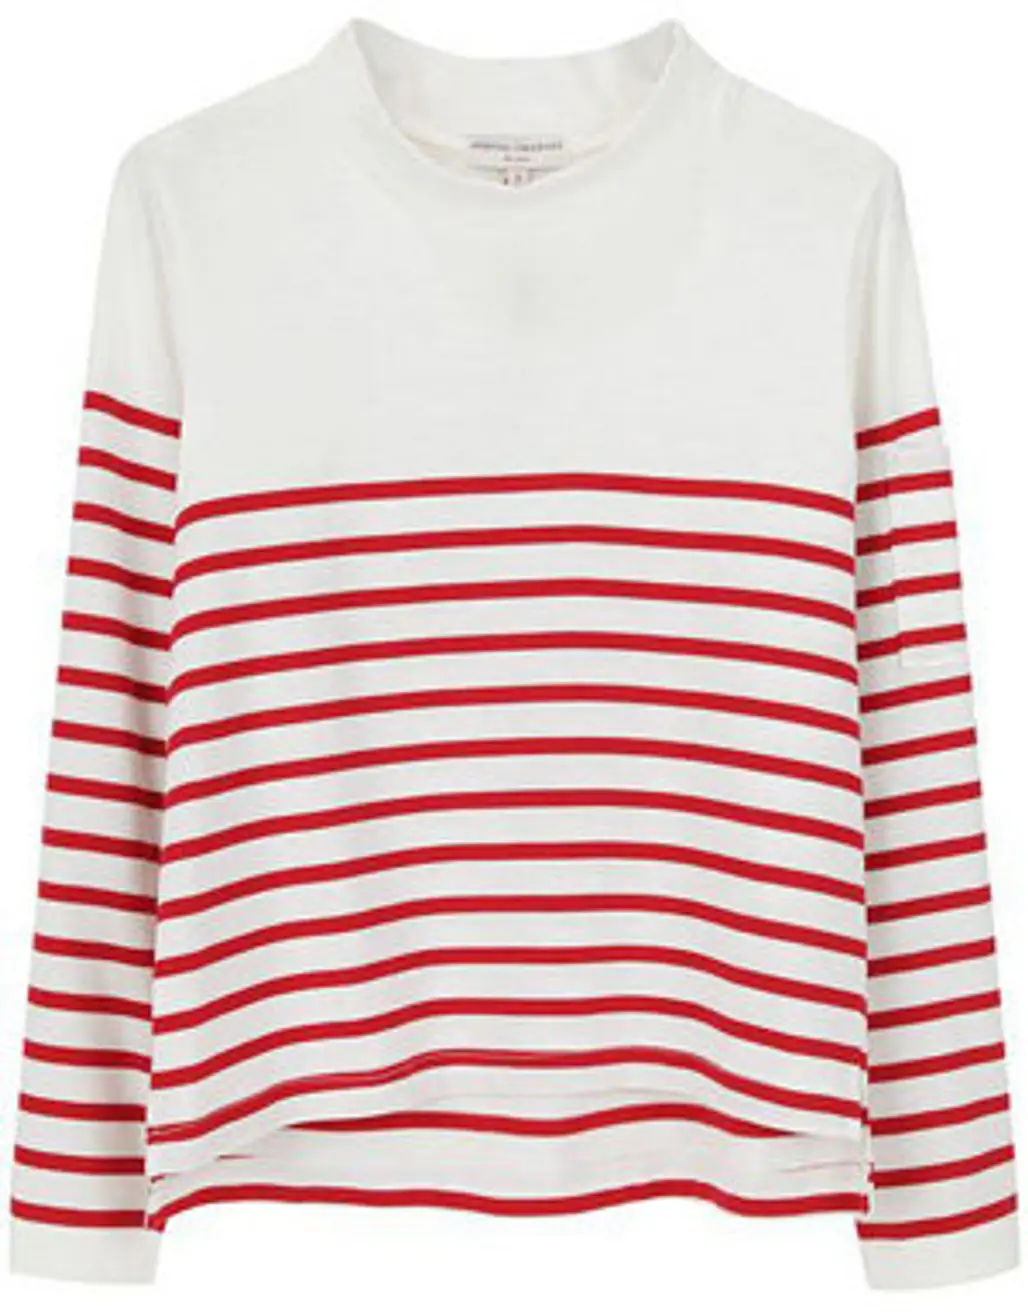 Opening Ceremony Cropped Red Stripe Top